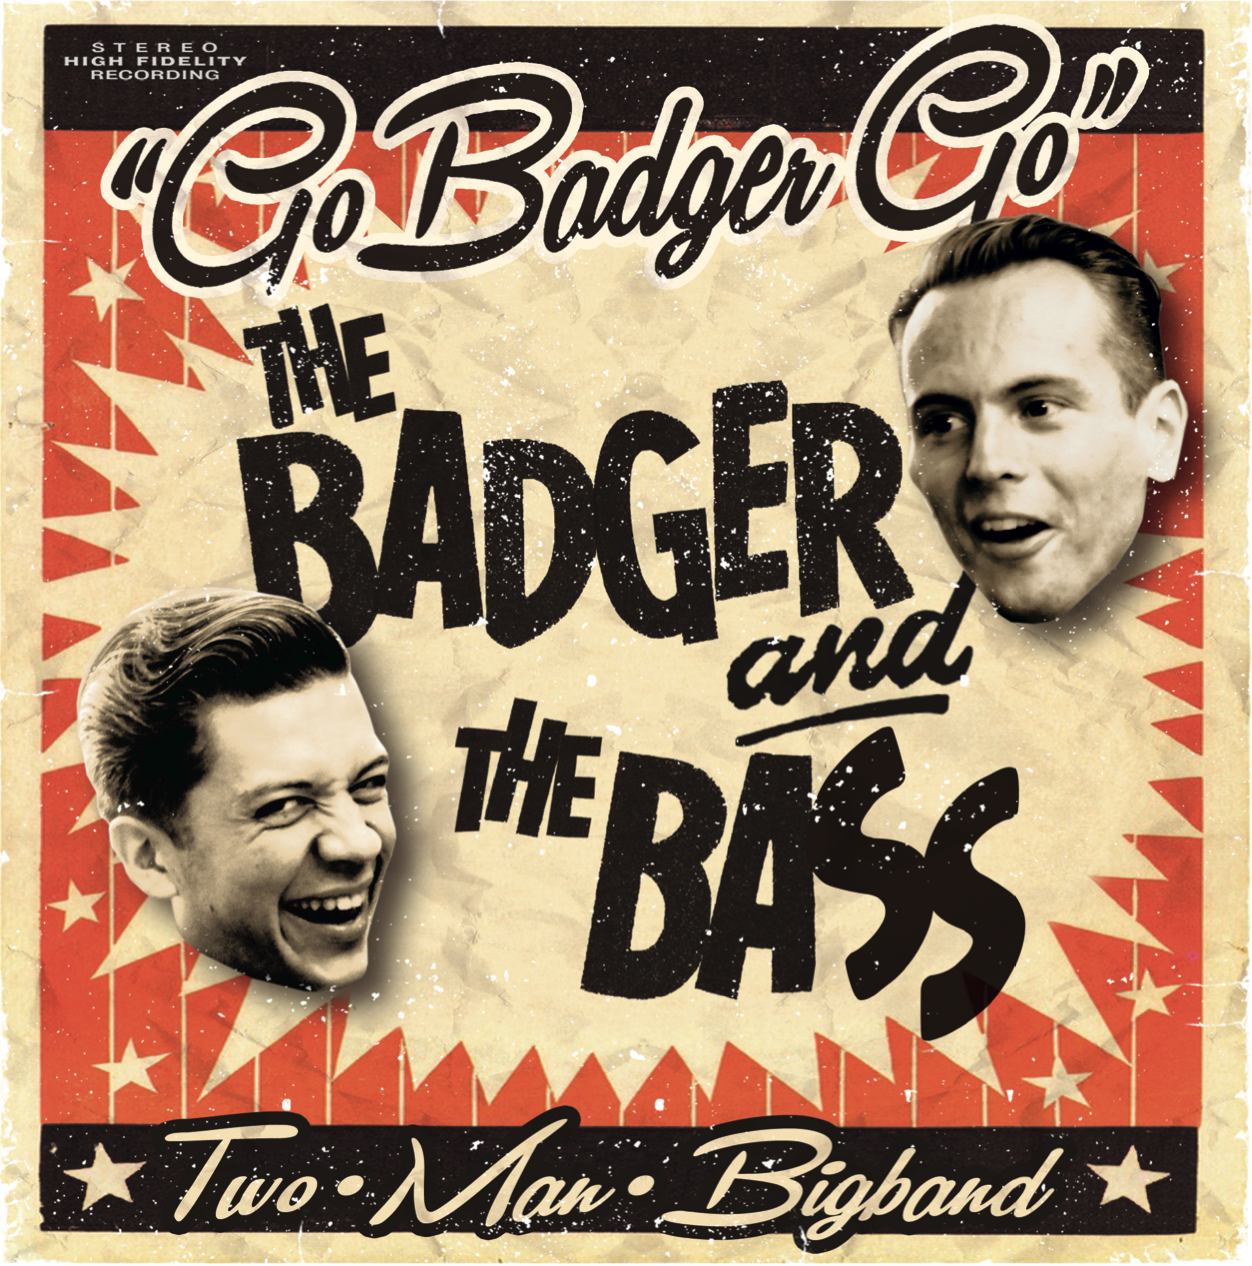 The Badger and the Bass